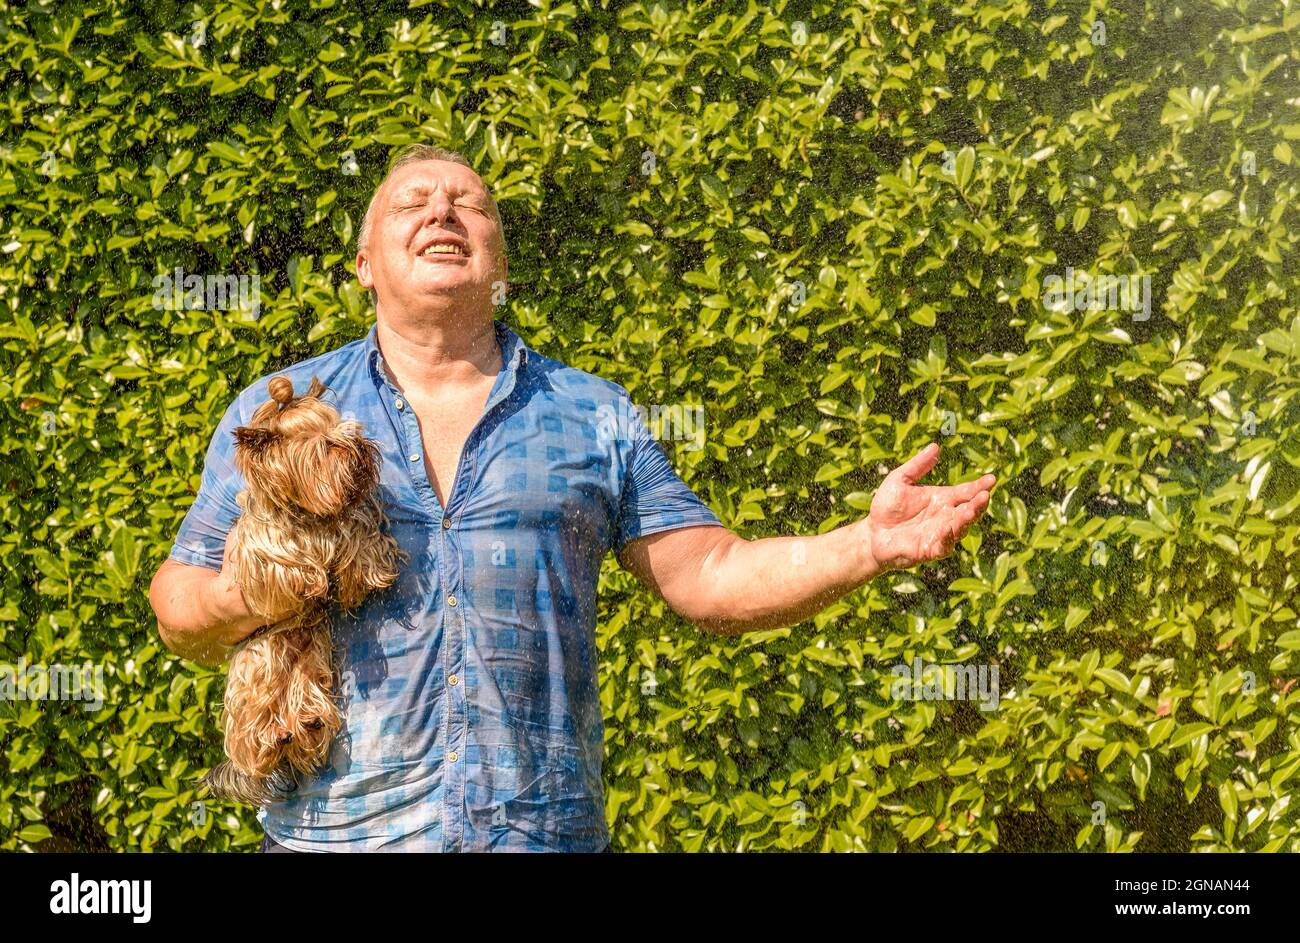 Mature man with Yorkshire terrier dog under splashing water on hot day in the garden. Stock Photo